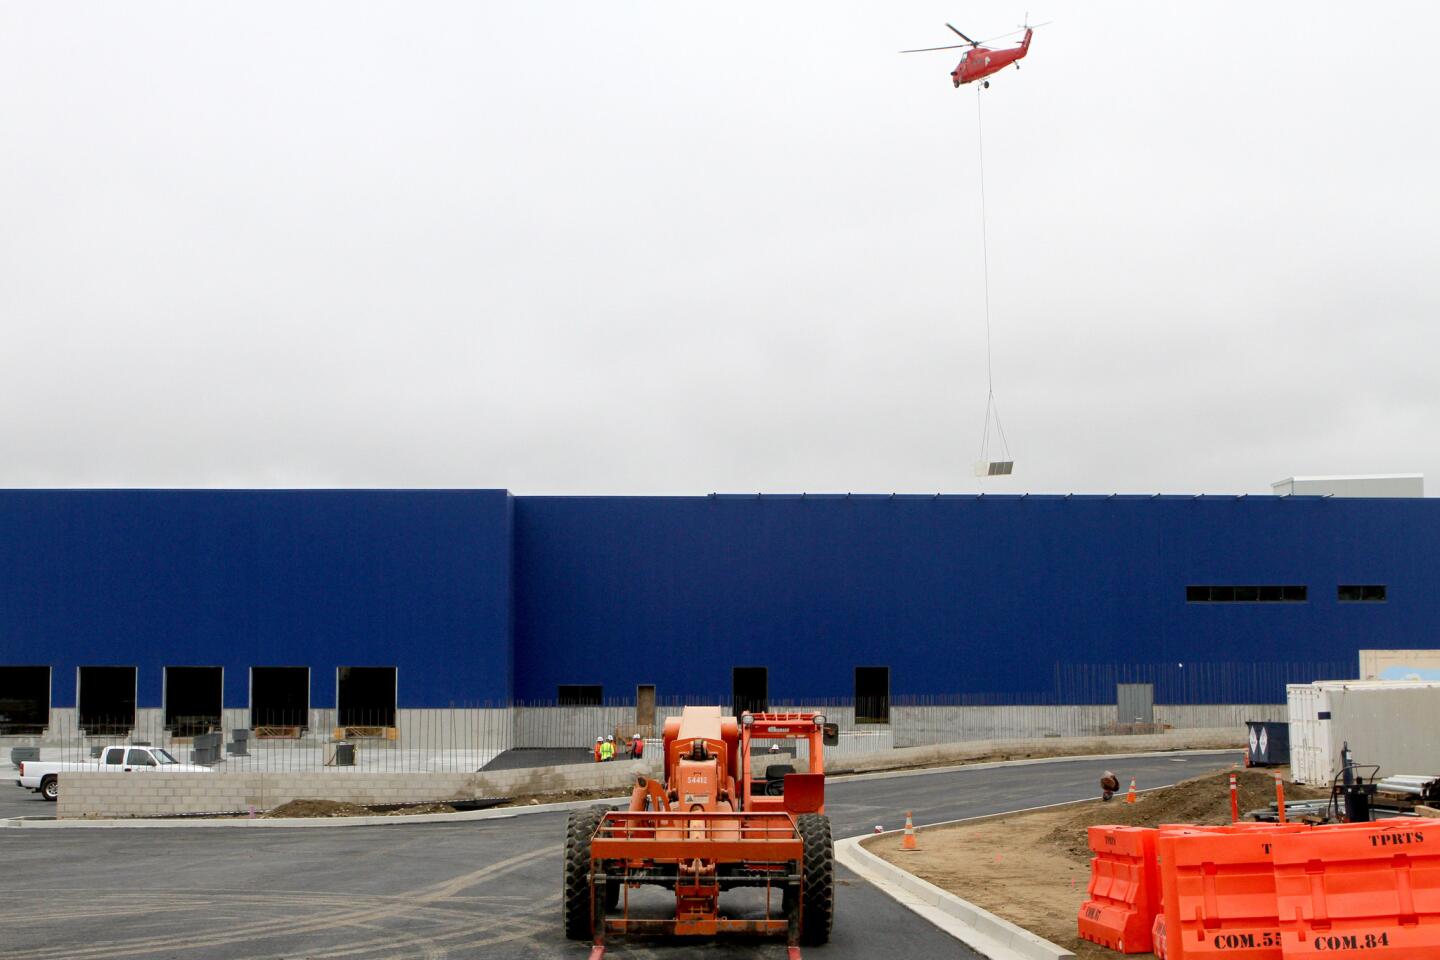 Photo Gallery: Air-conditioning units air-lifted to new Burbank Ikea store roof